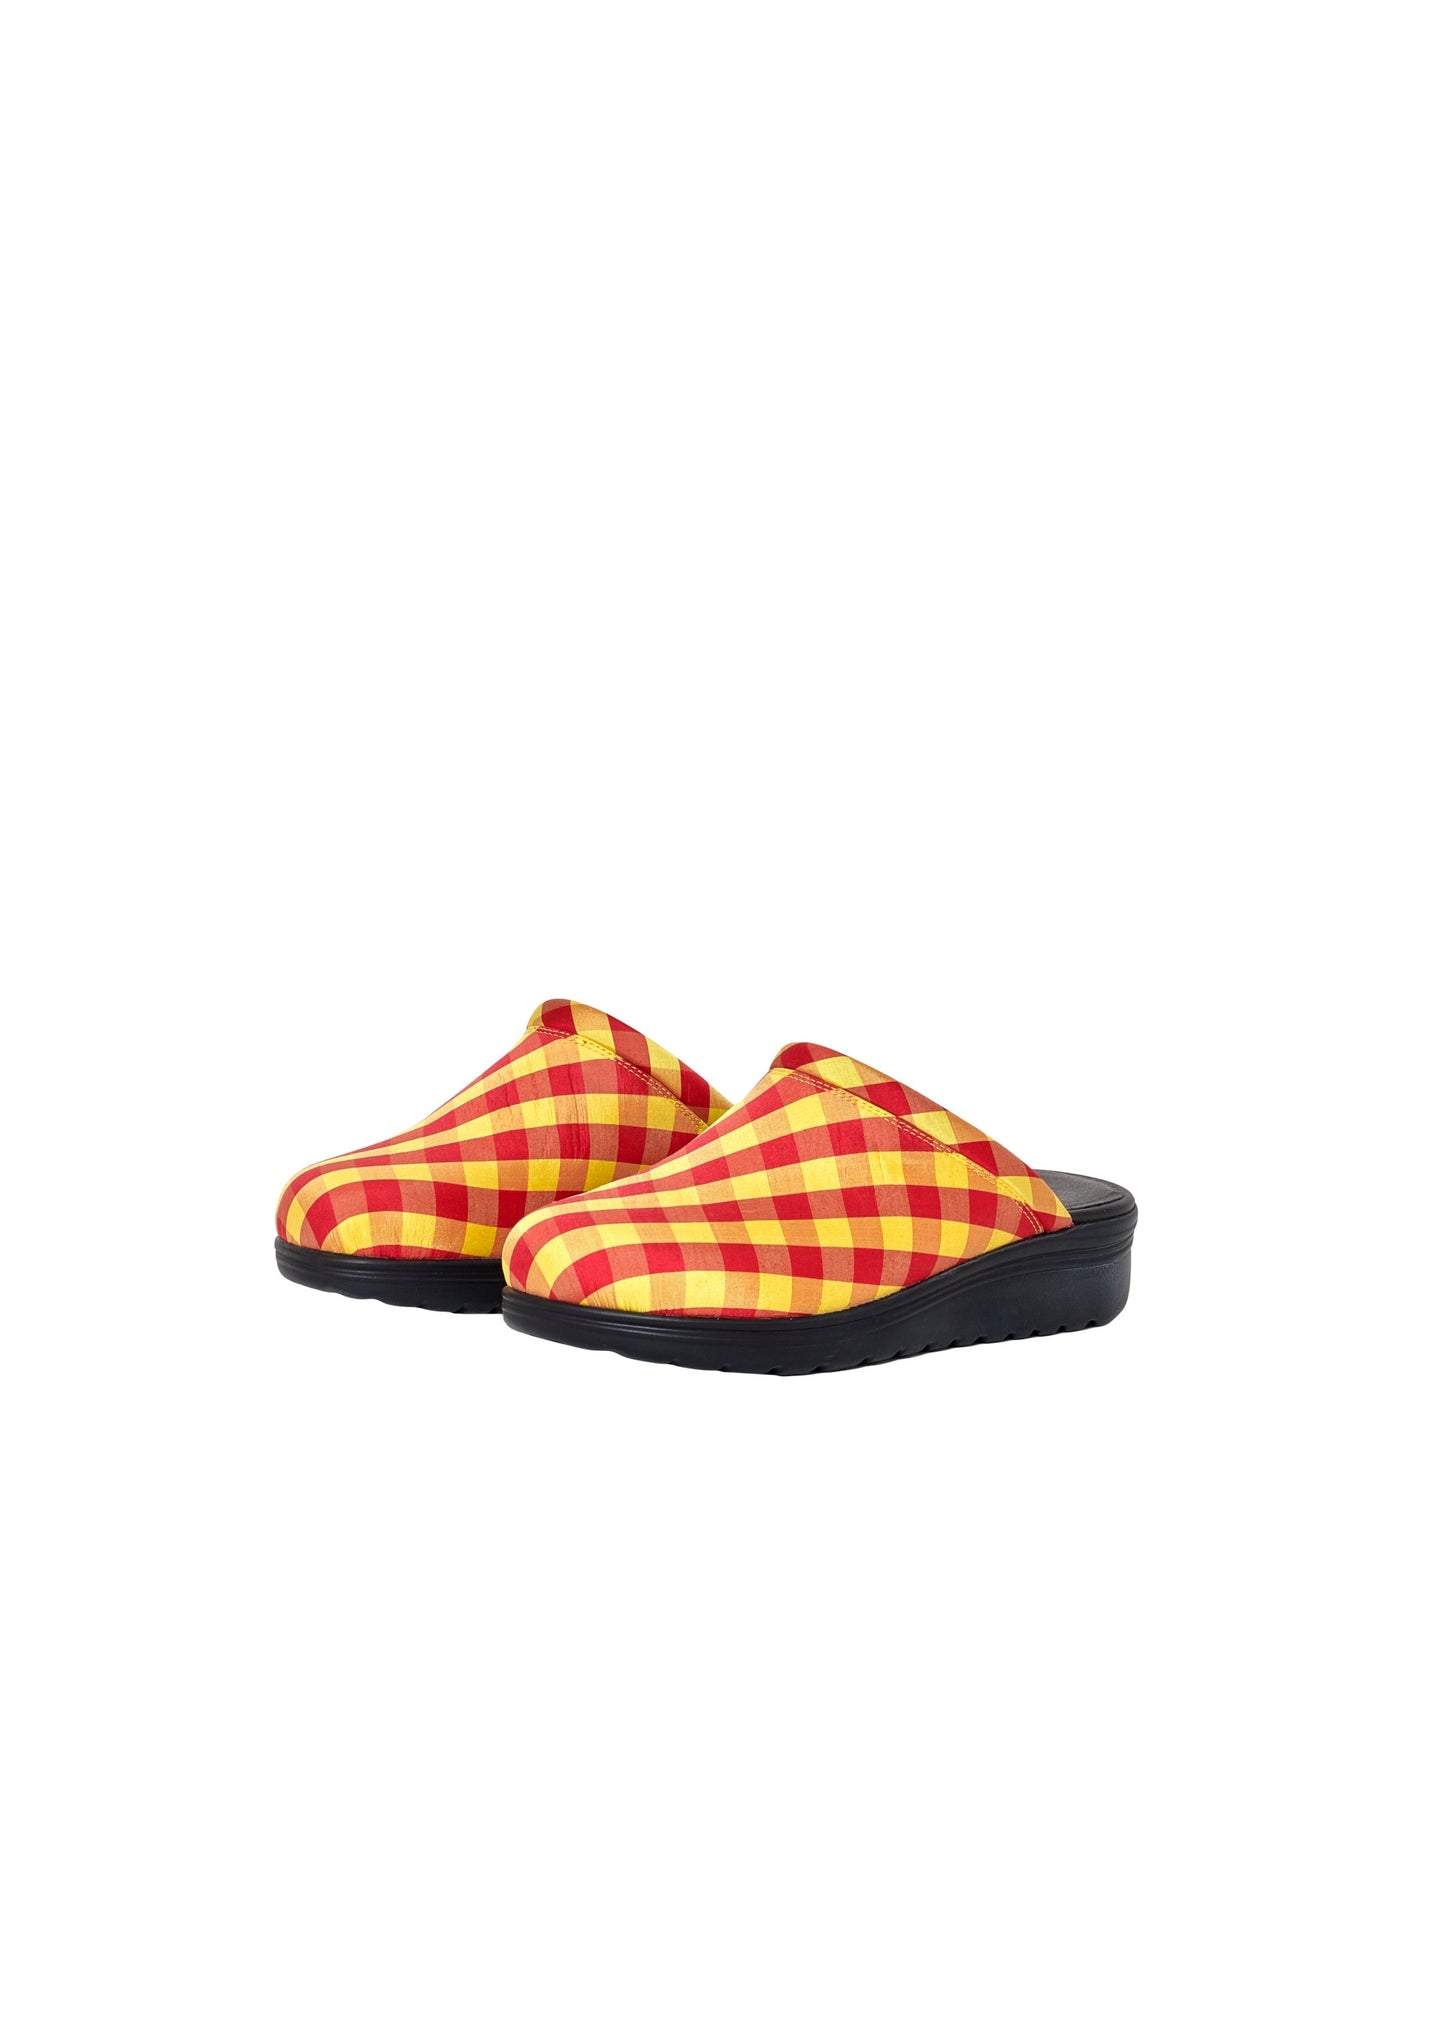 Gingham Red Yellow Clog